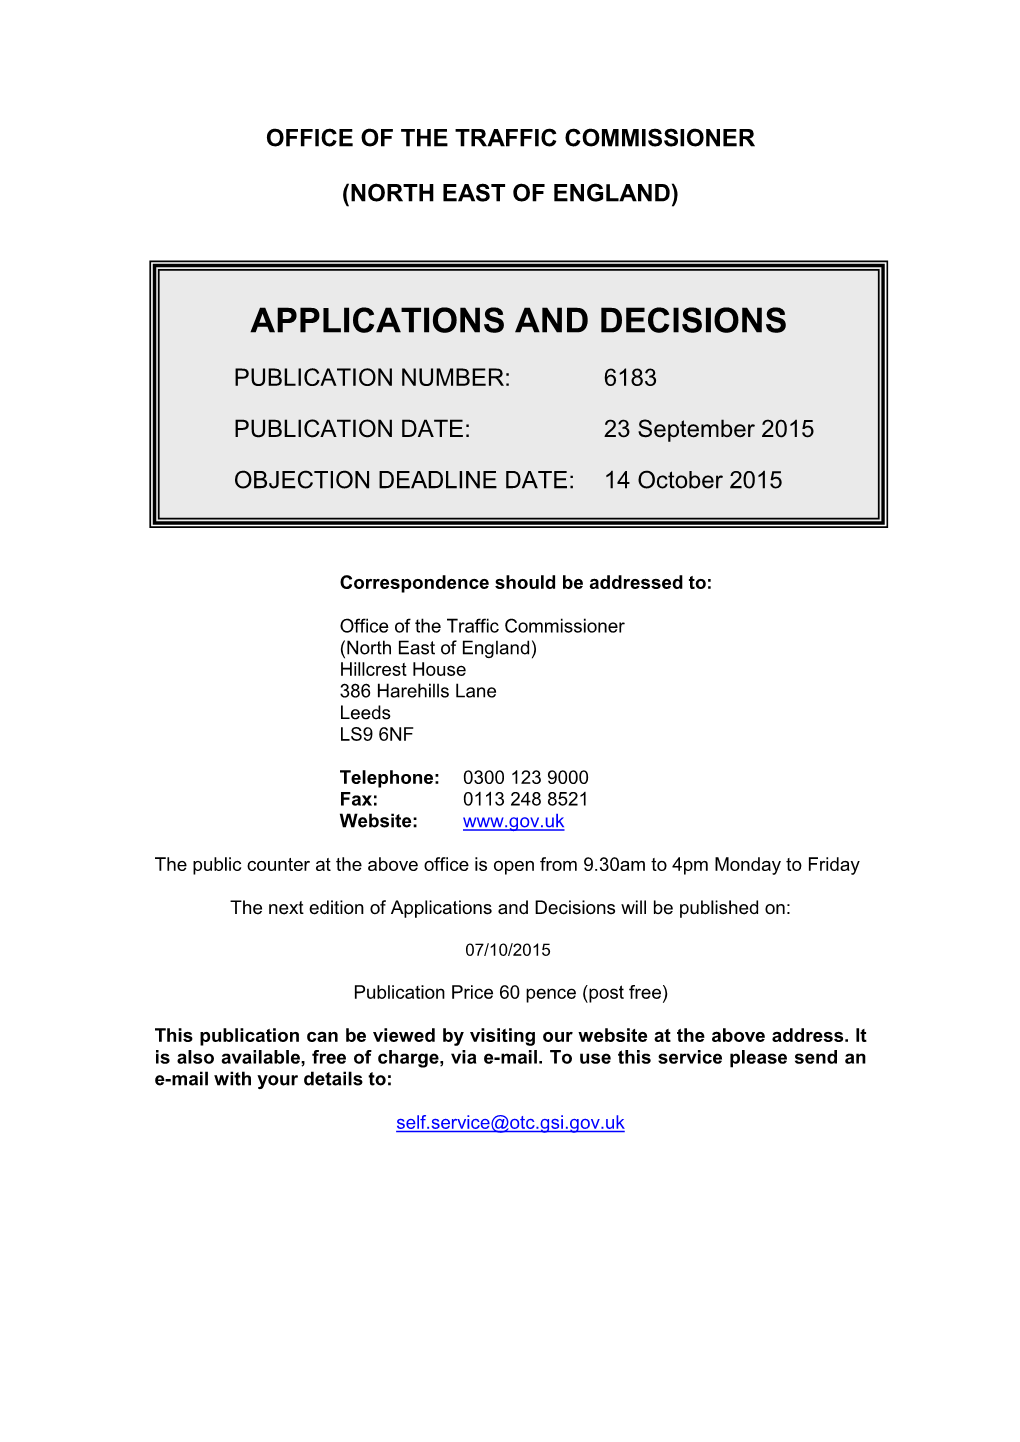 APPLICATIONS and DECISIONS 23 September 2015